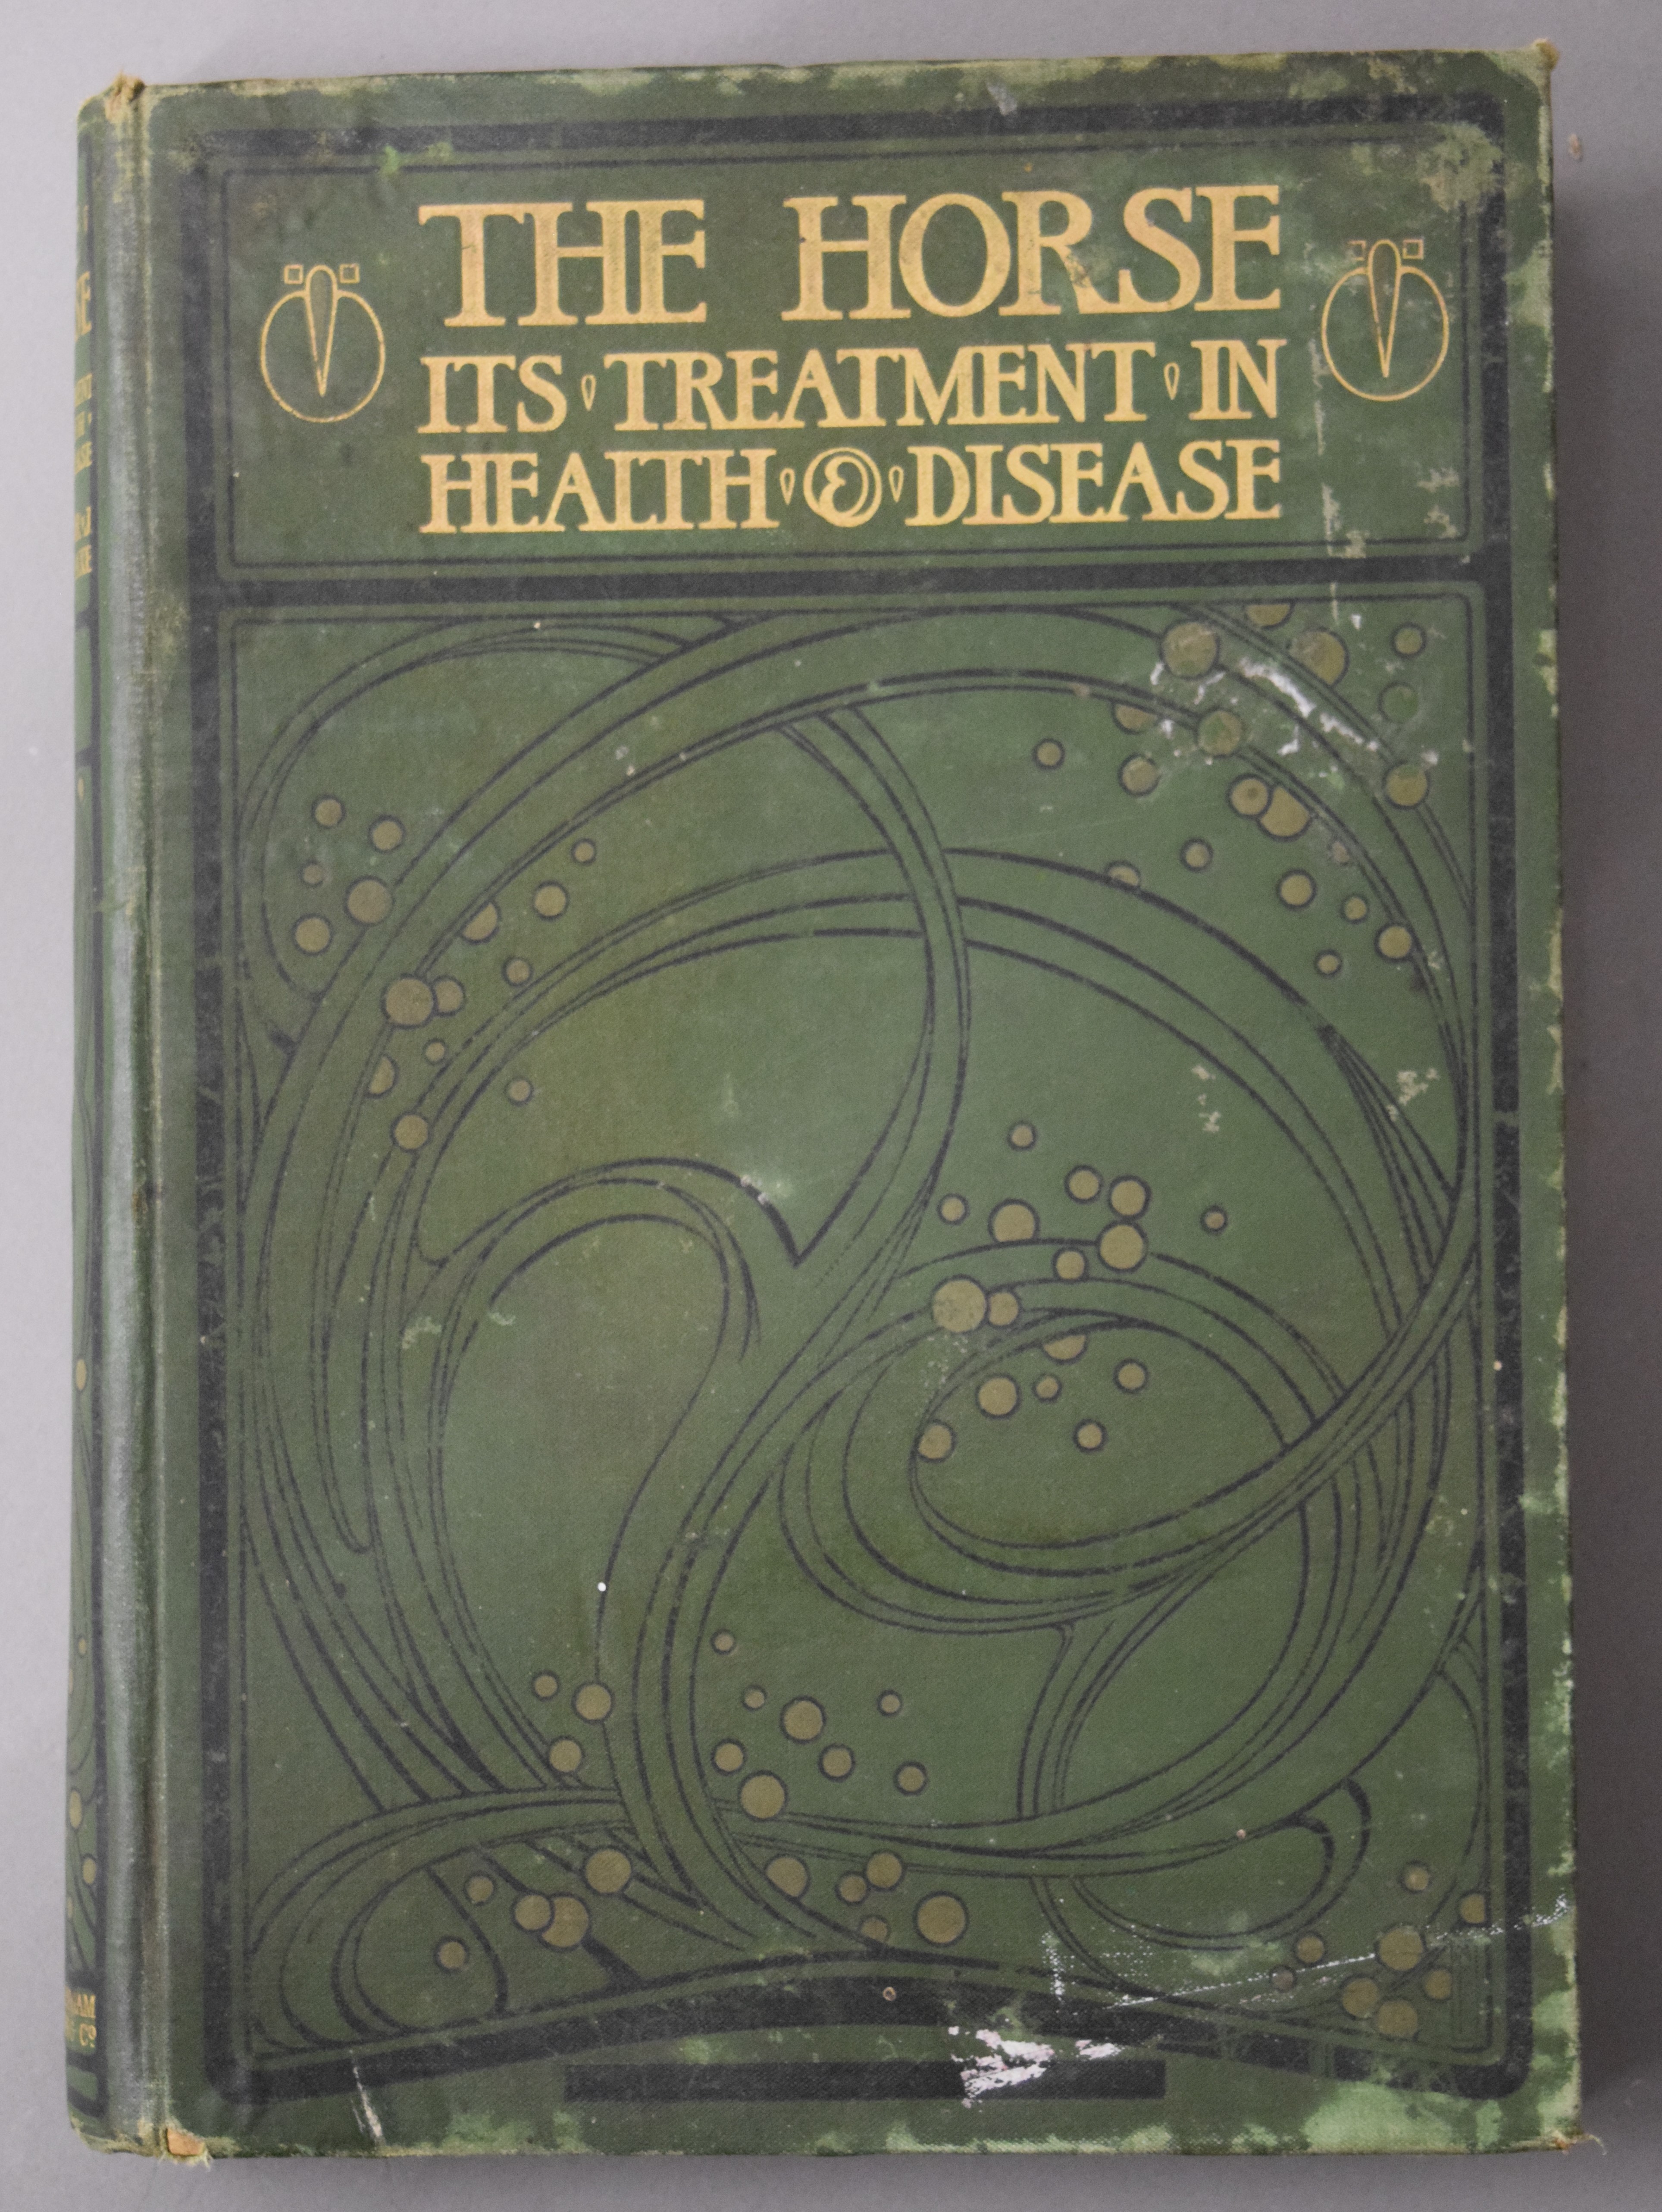 Wortley Axe, Professor J, The Horse Its Treatment in Health and Disease, volume 1. - Image 2 of 5